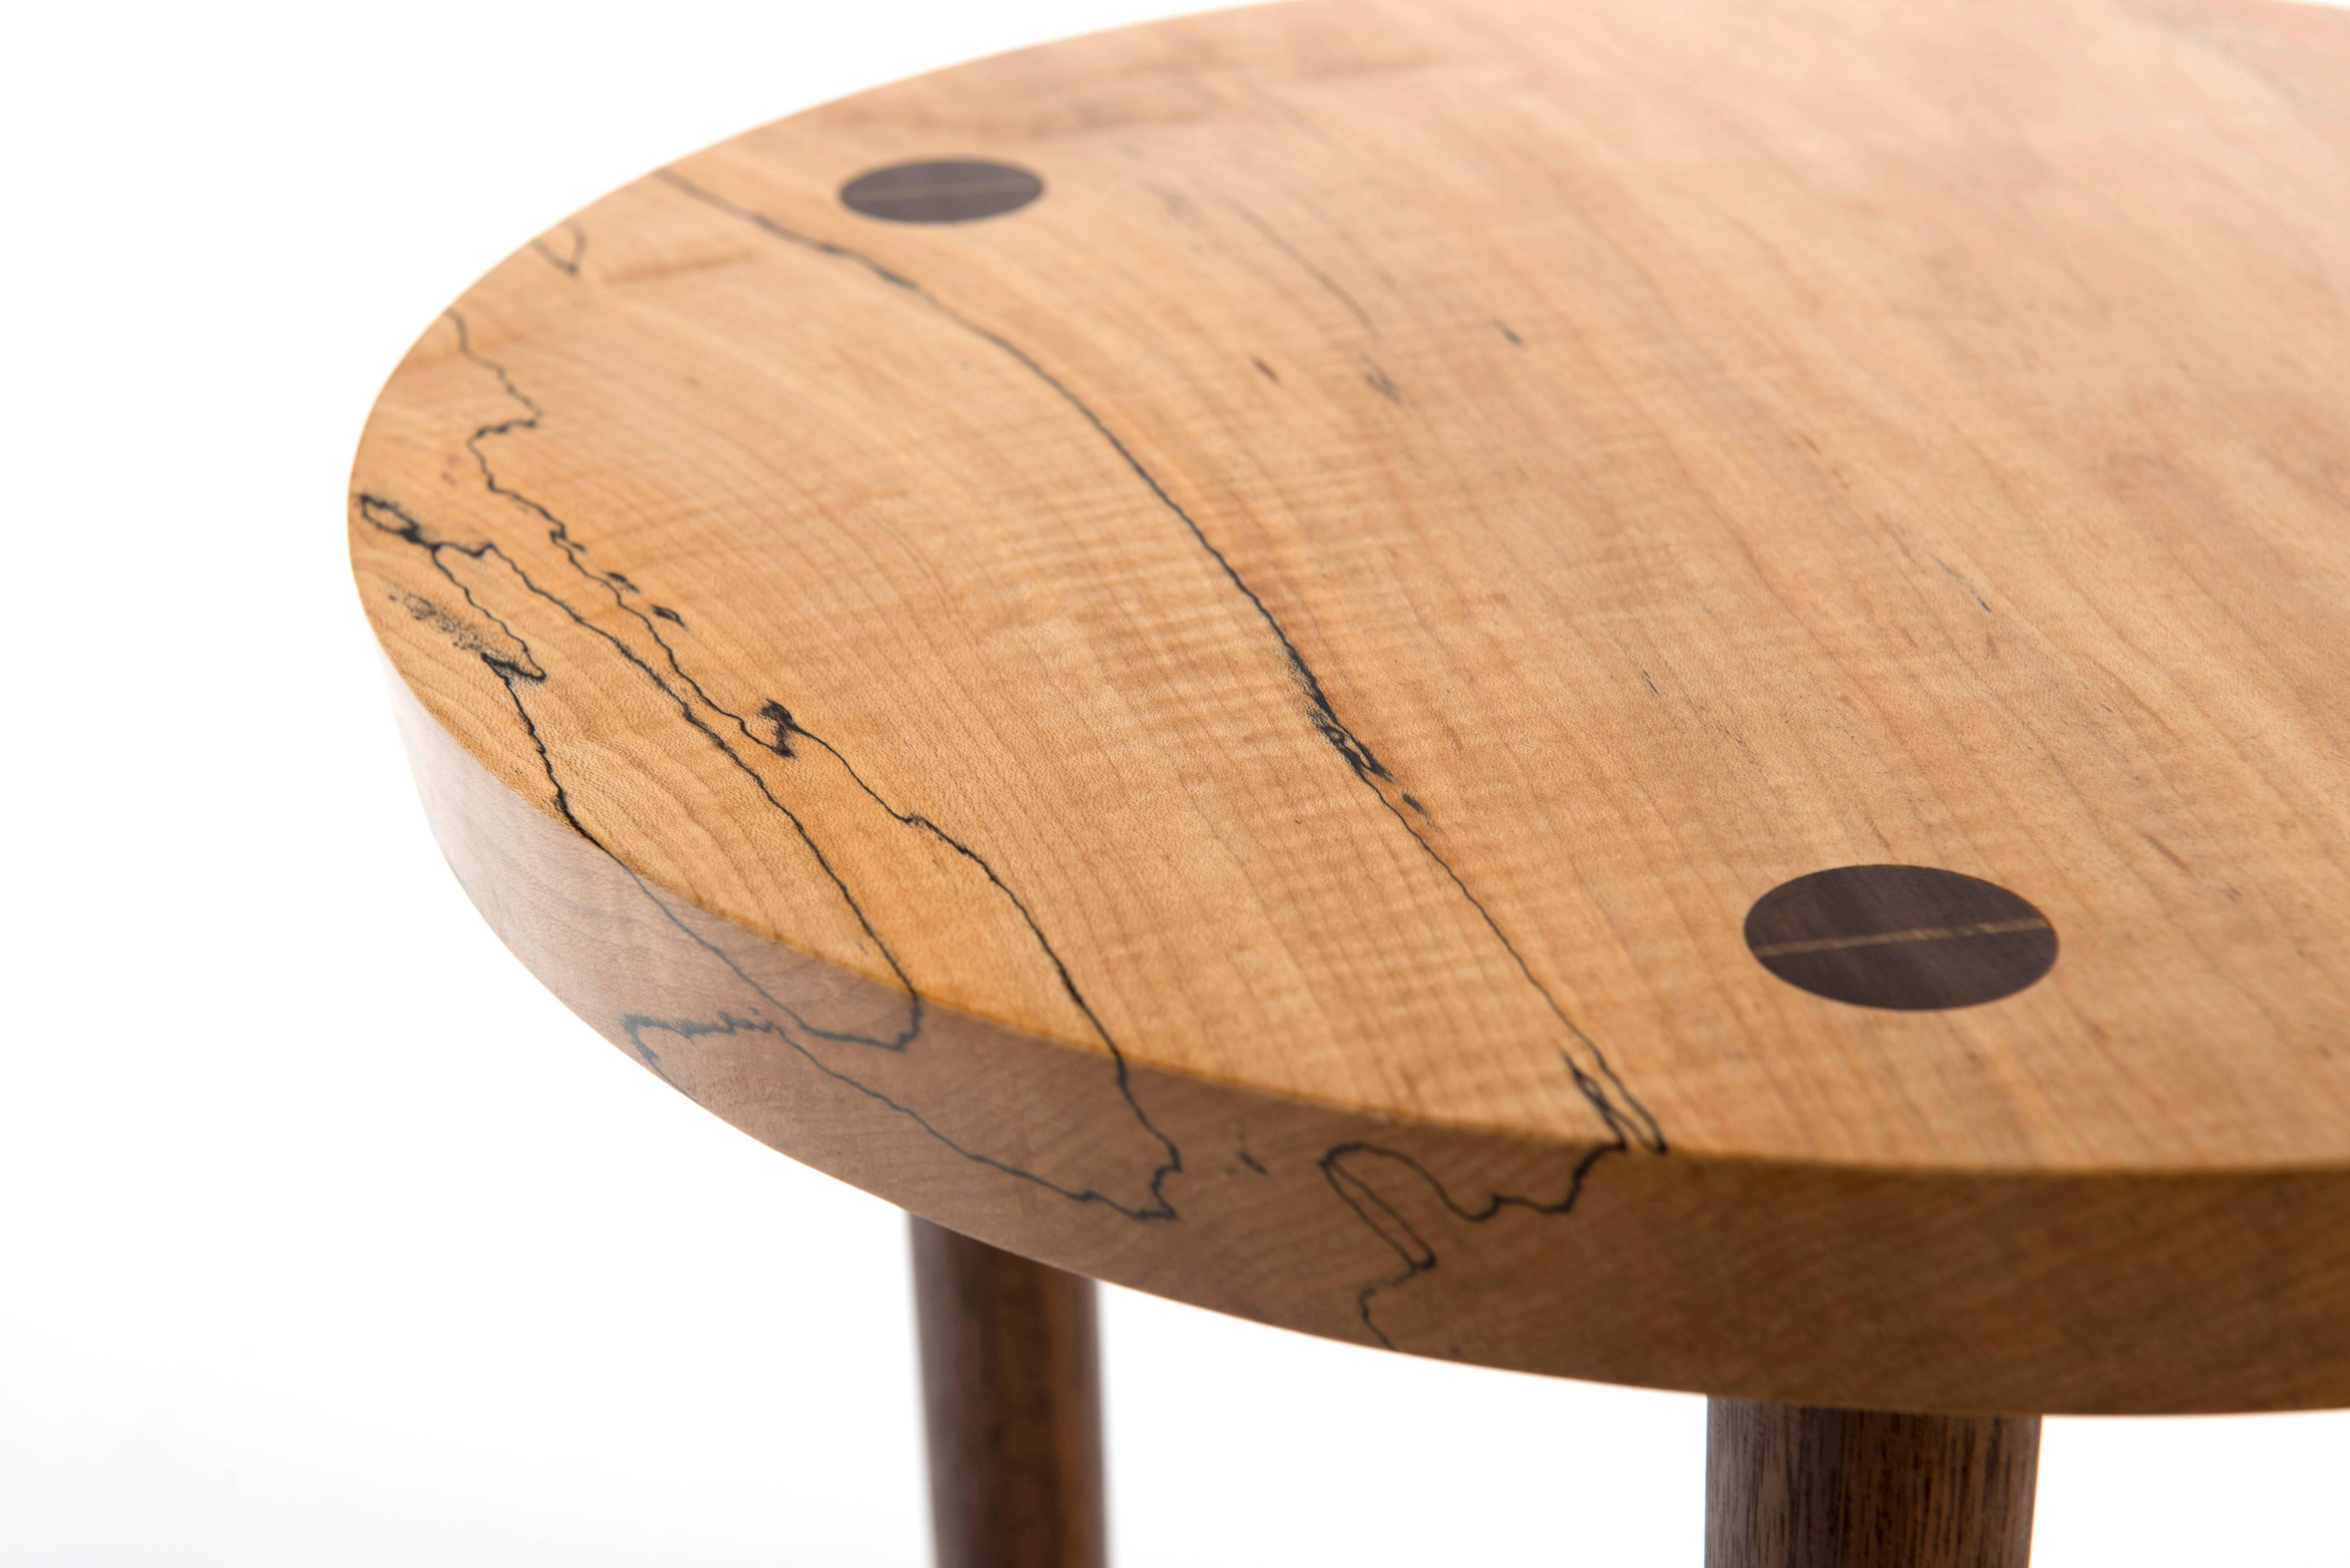 Edition of 15. This three-leg design centers around the through-cut joinery affixing the subtly beveled edge of the curly Maple top with the Black Walnut base. A graphic wedge of Maple in this joint bisects the circular face of each Walnut leg. To